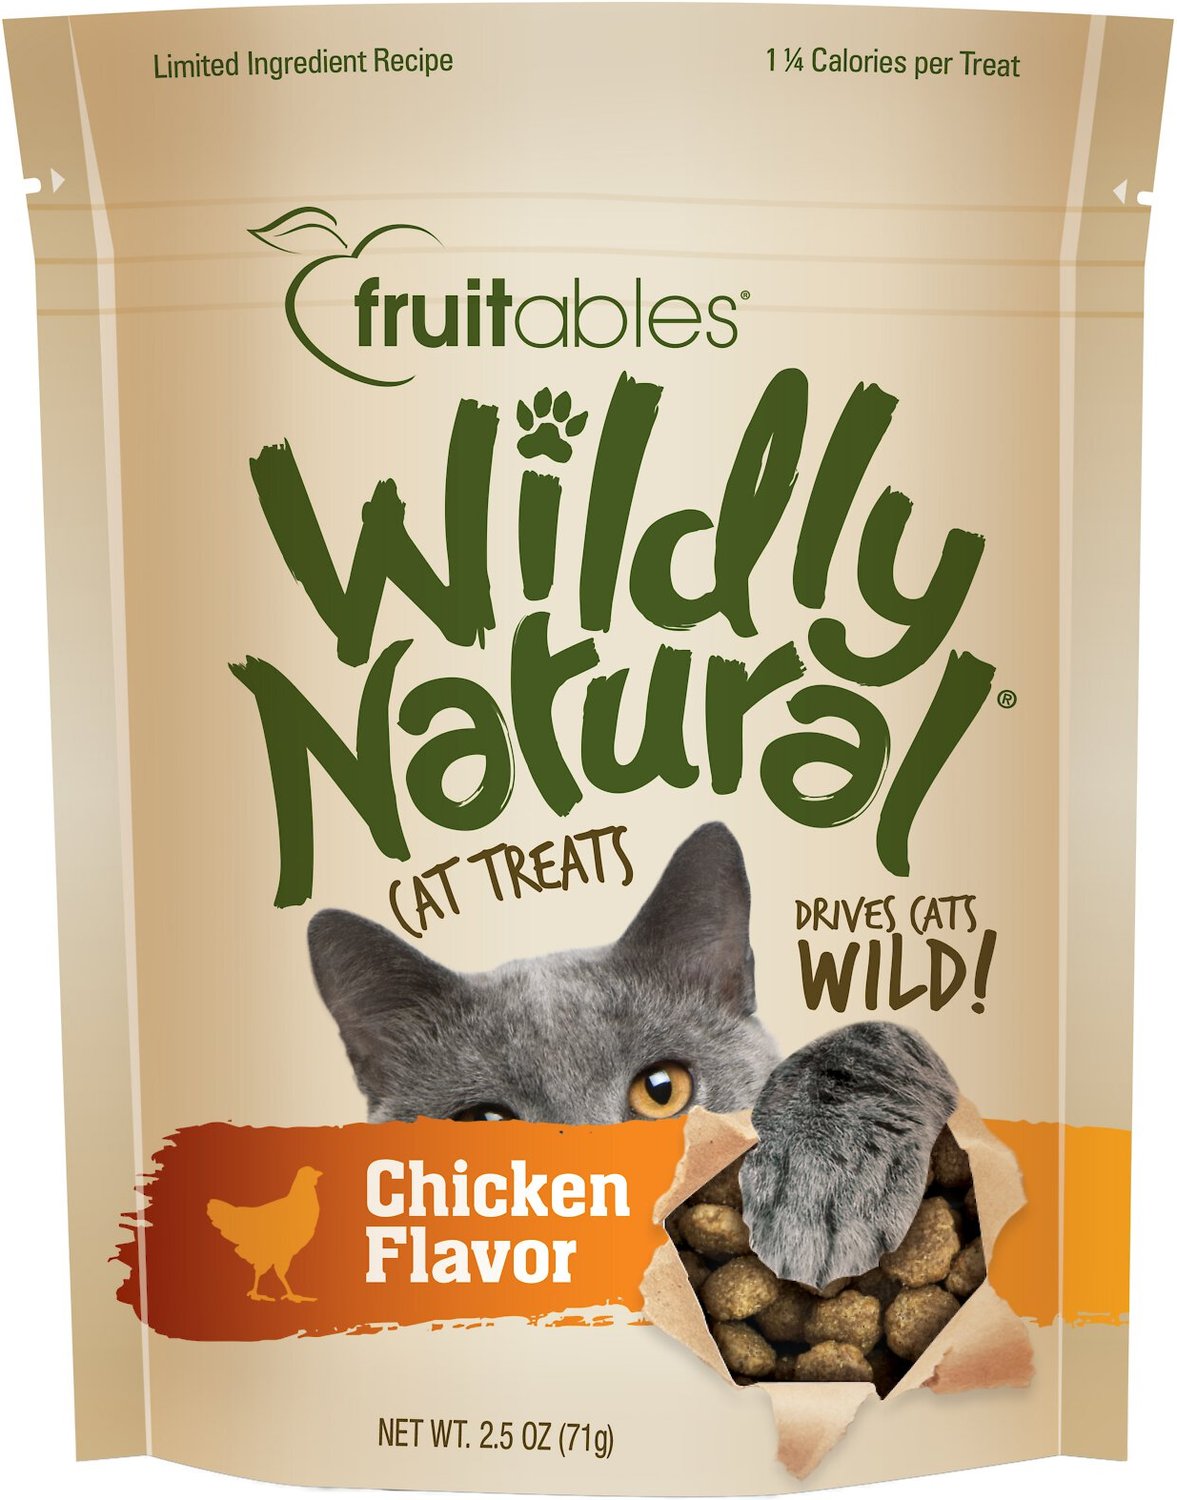 Natural Provides Health Benefits First Ingredient is Real Meat 2.5oz Low-Calorie Treats for Cats Shameless Pets Crunchy Cat Treats 